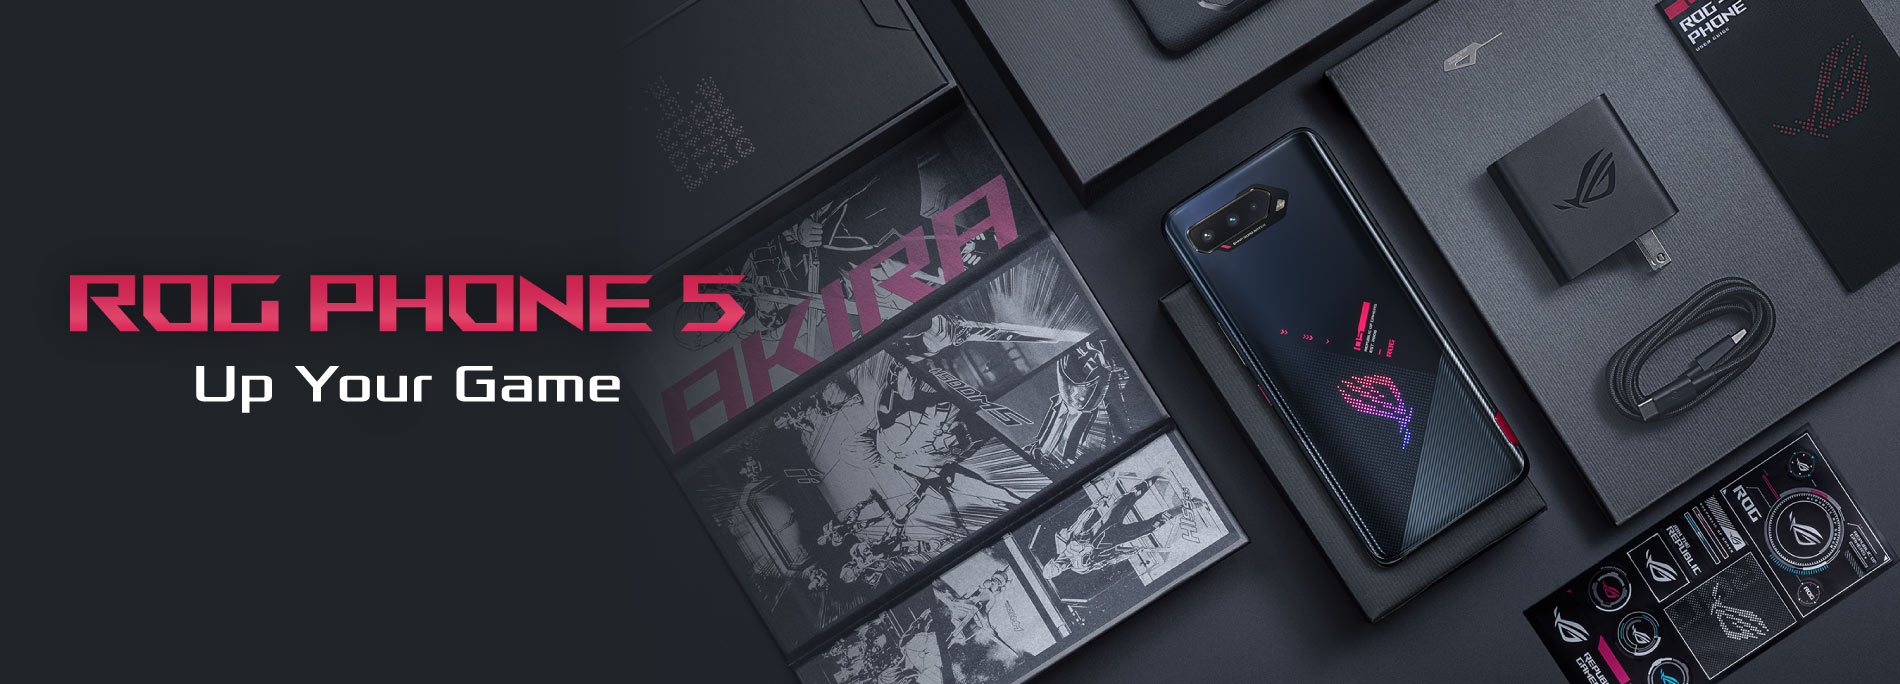 Pre-order ROG Phone 5 - Up Your Game